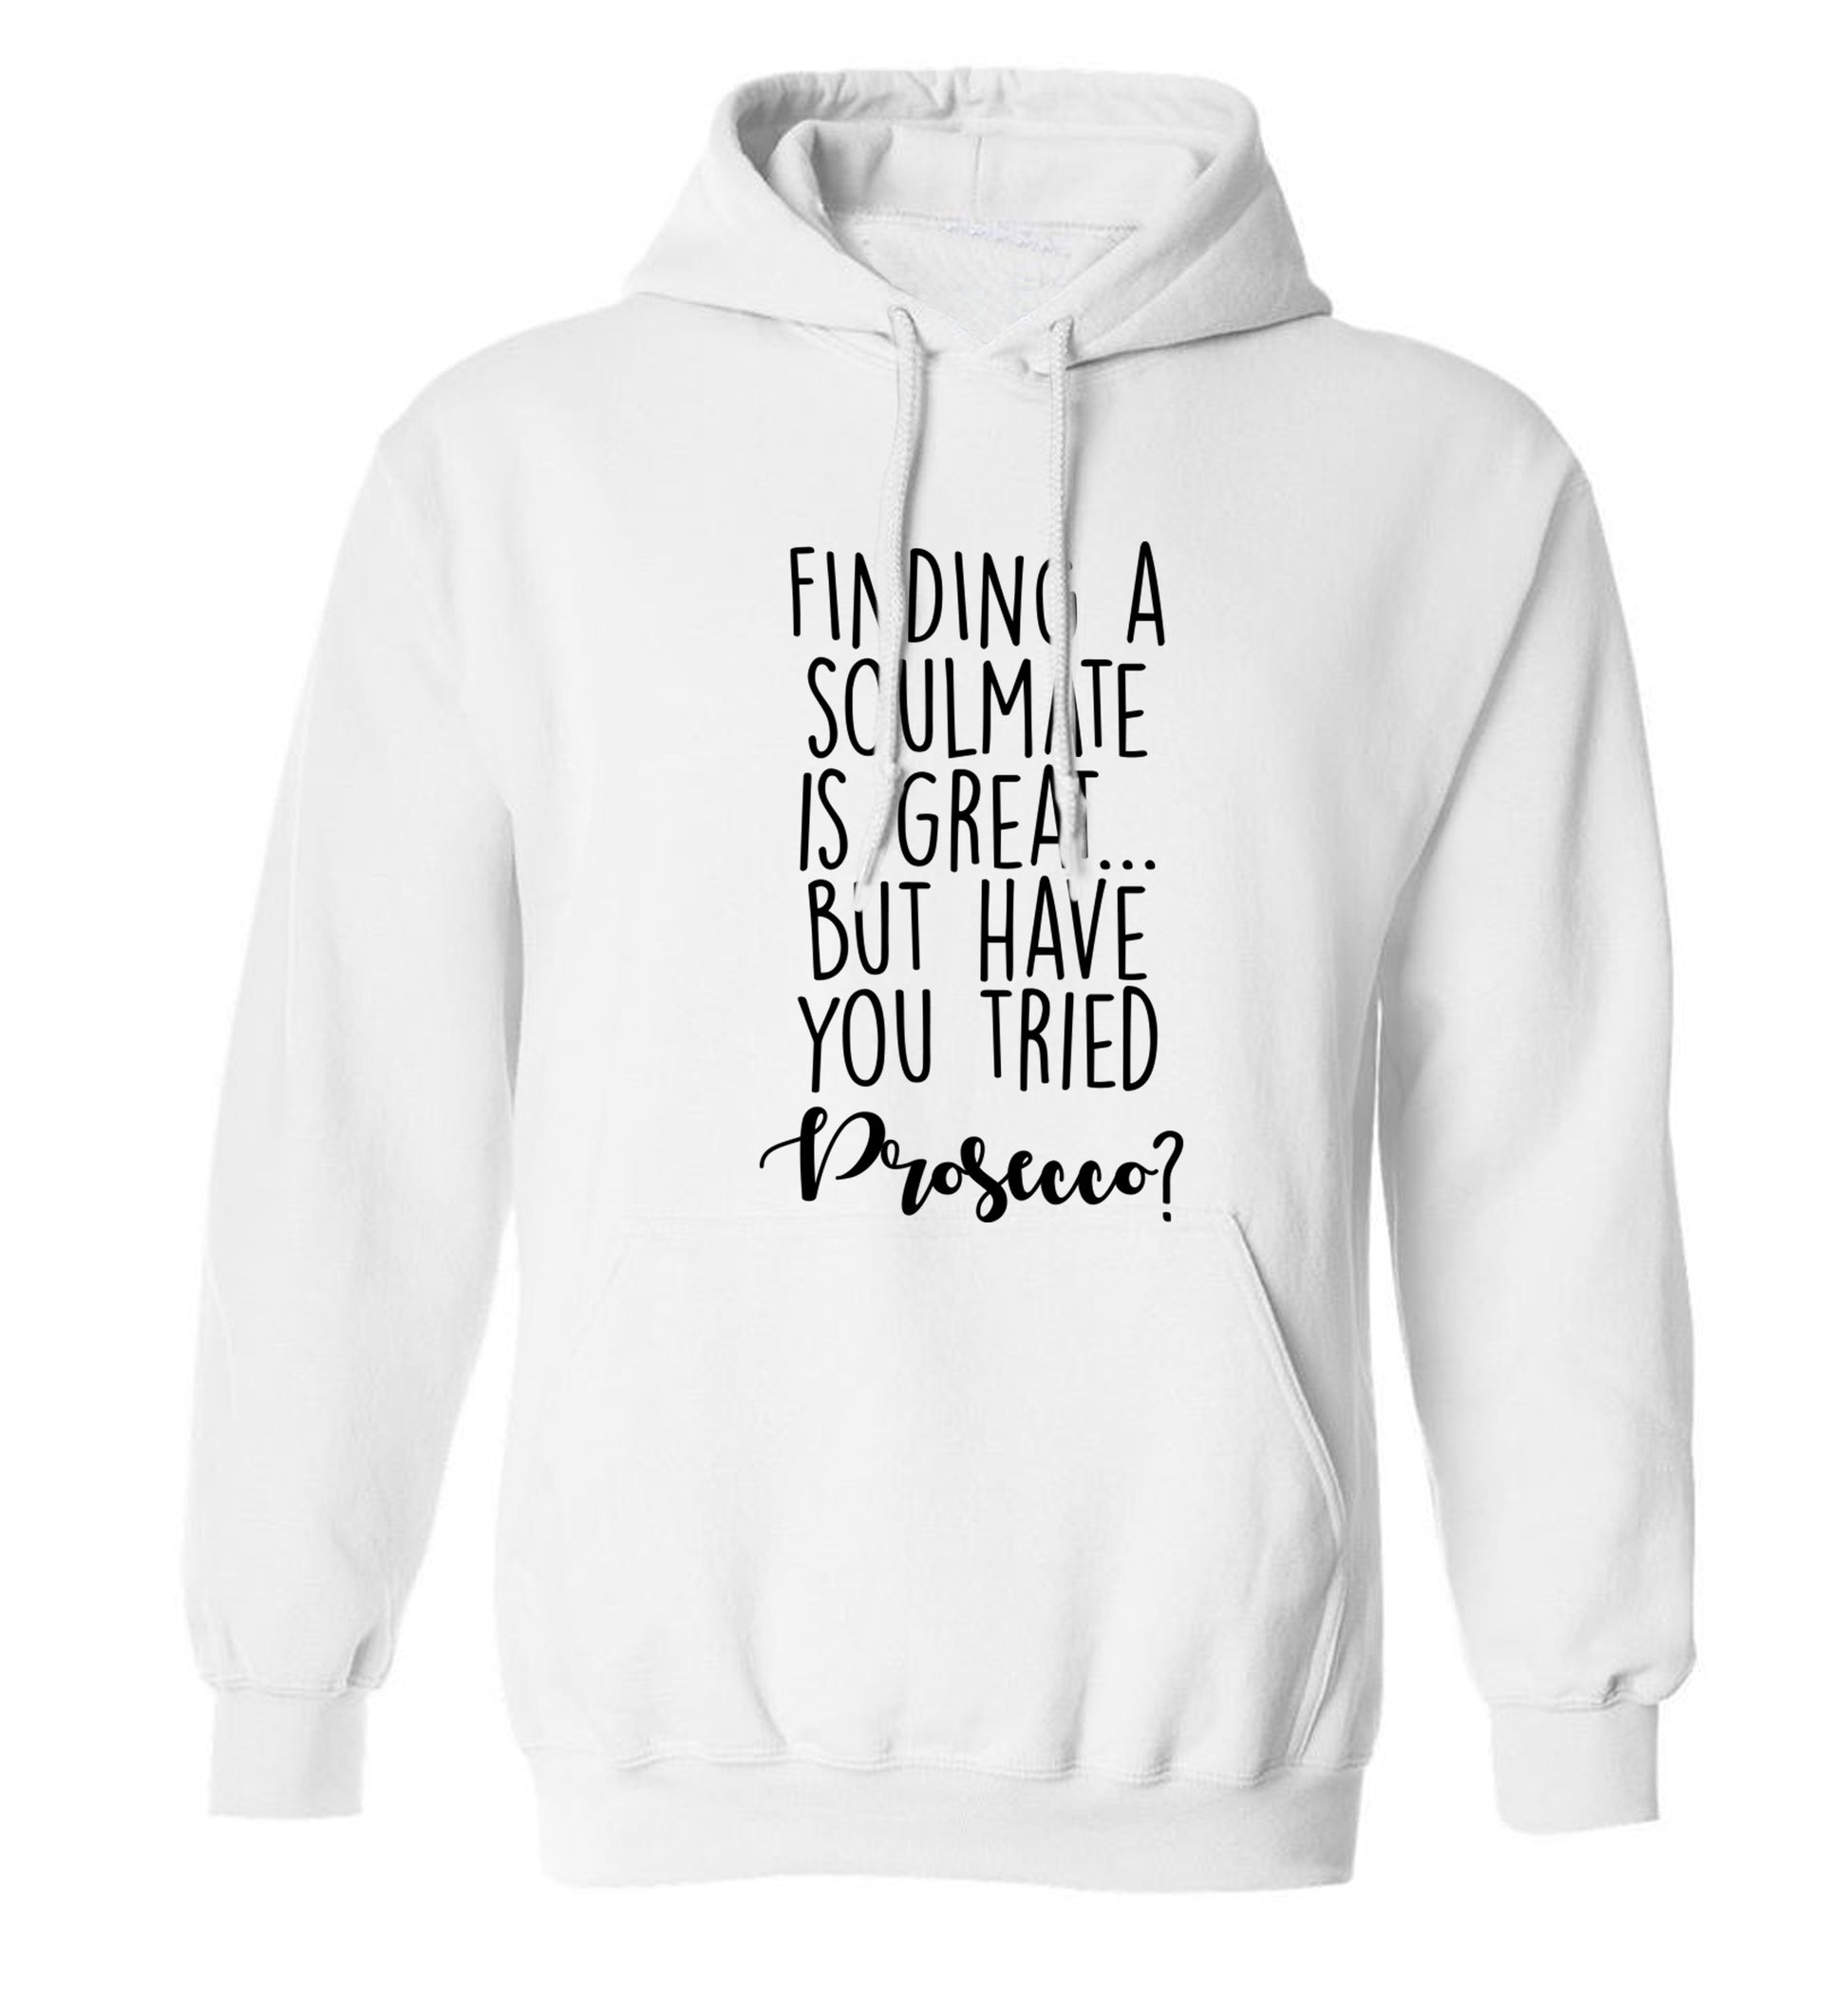 Finding a soulmate is great but have you tried prosecco? adults unisex white hoodie 2XL